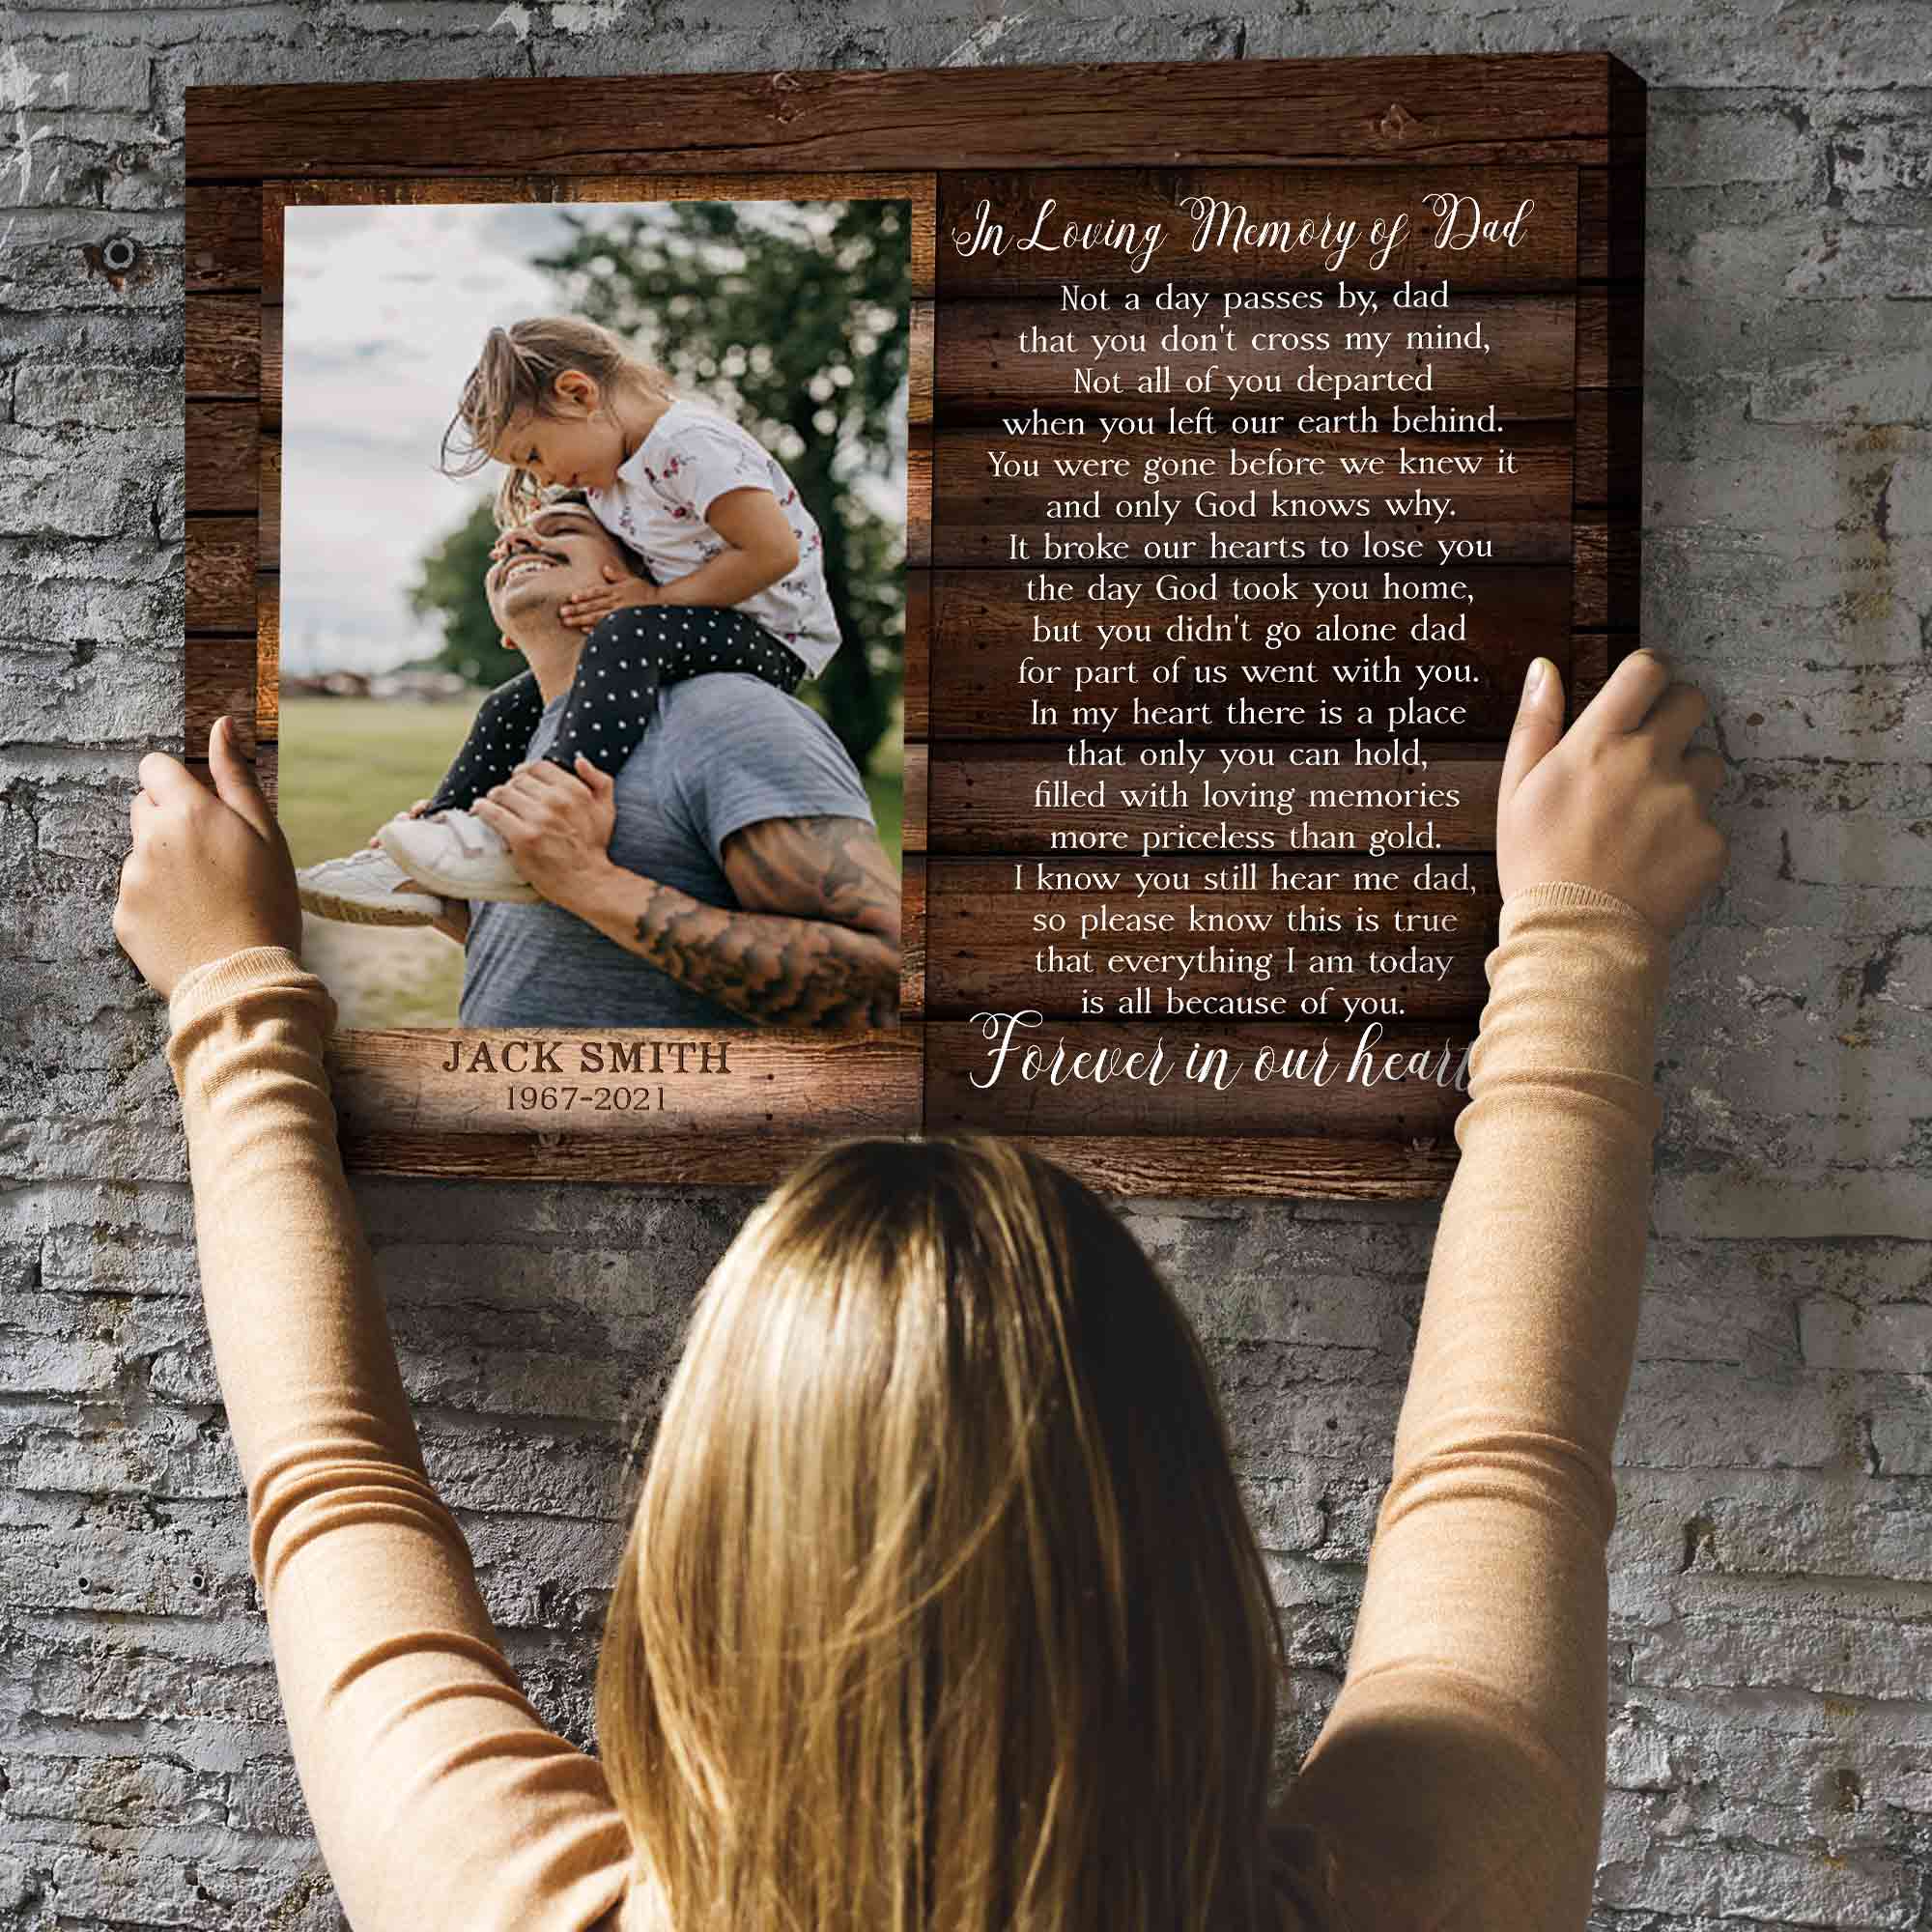 Personalized Memorial Gifts With Photo Loss Of Father, Fathers Day Gift, In Loving Memory Wall Decor, Condolence Gift, Funeral Poem